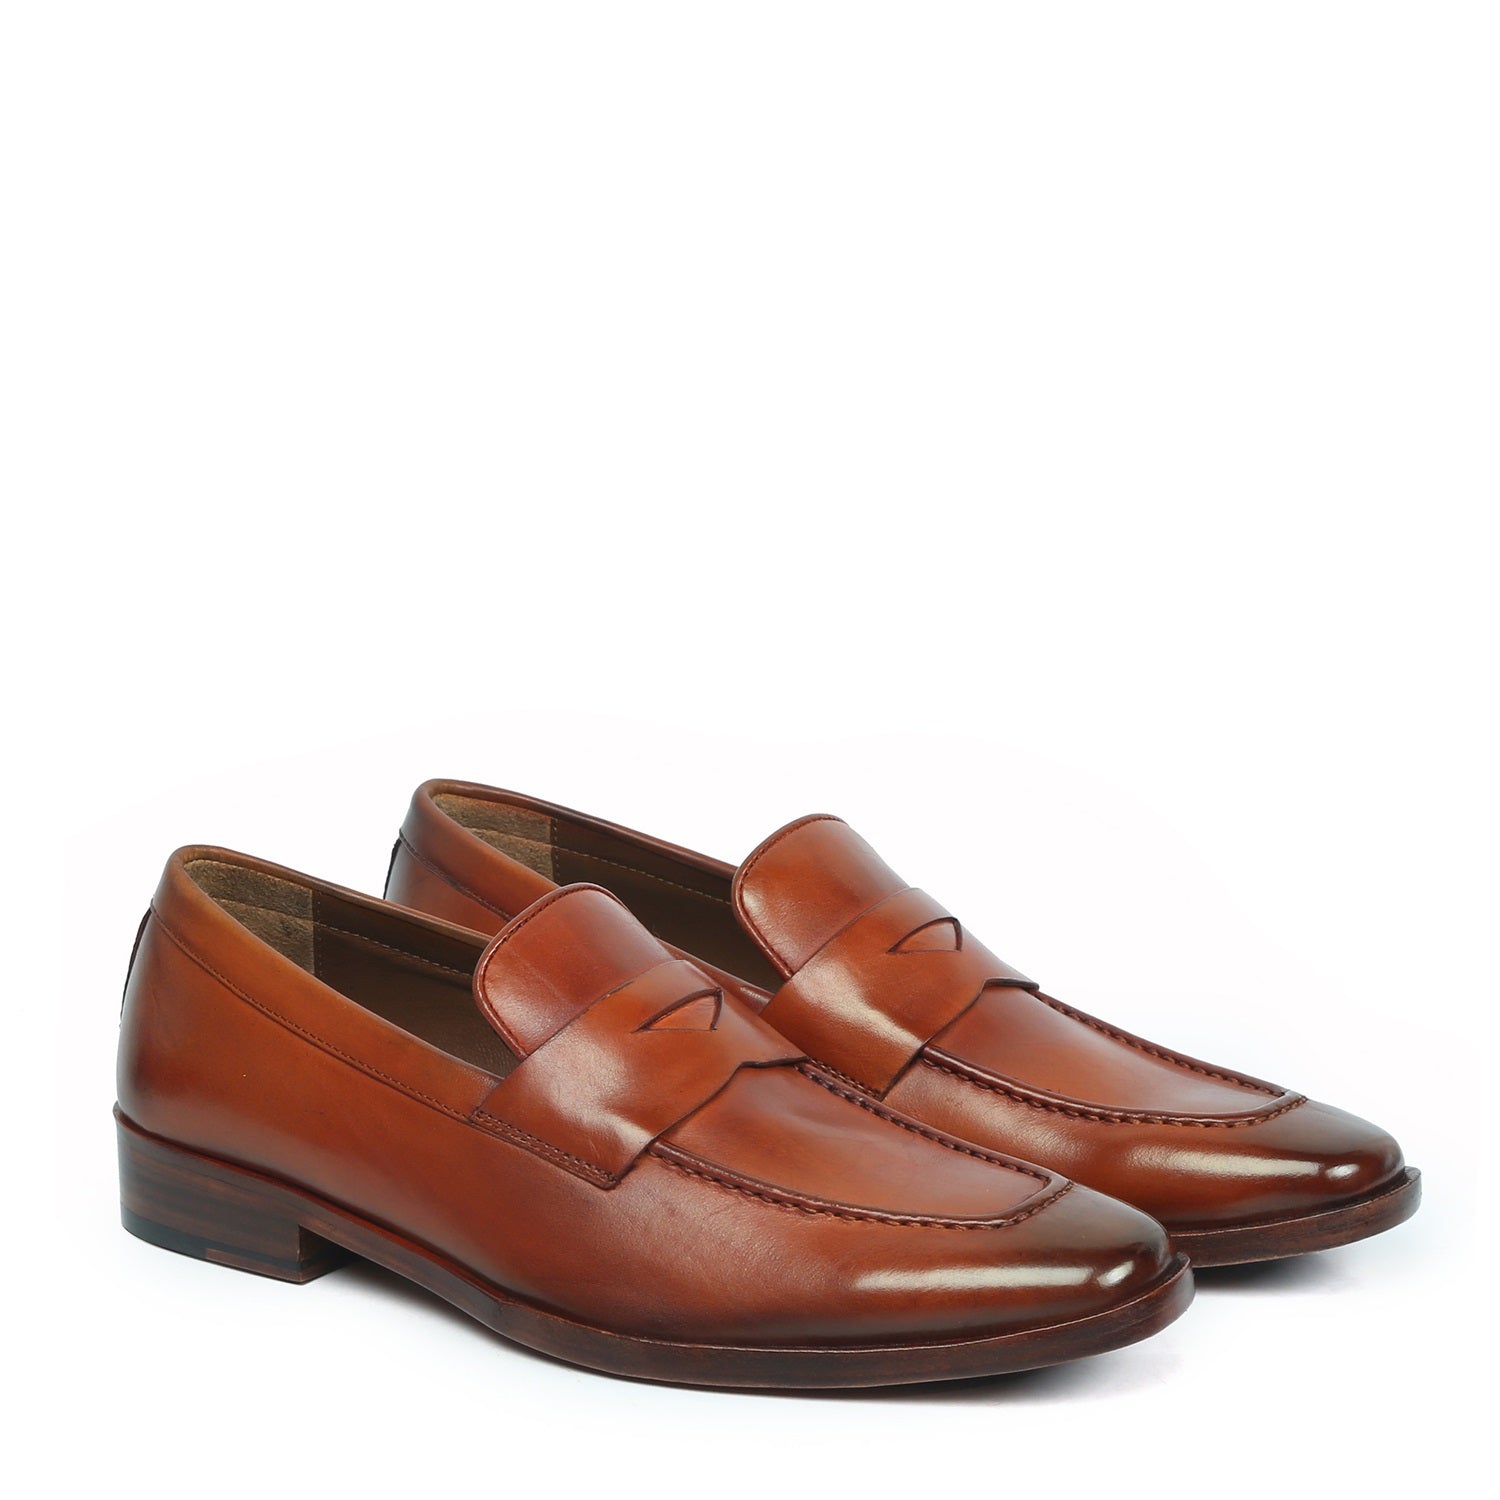 Tan Leather Penny Loafers with Triangular Cut-Strap